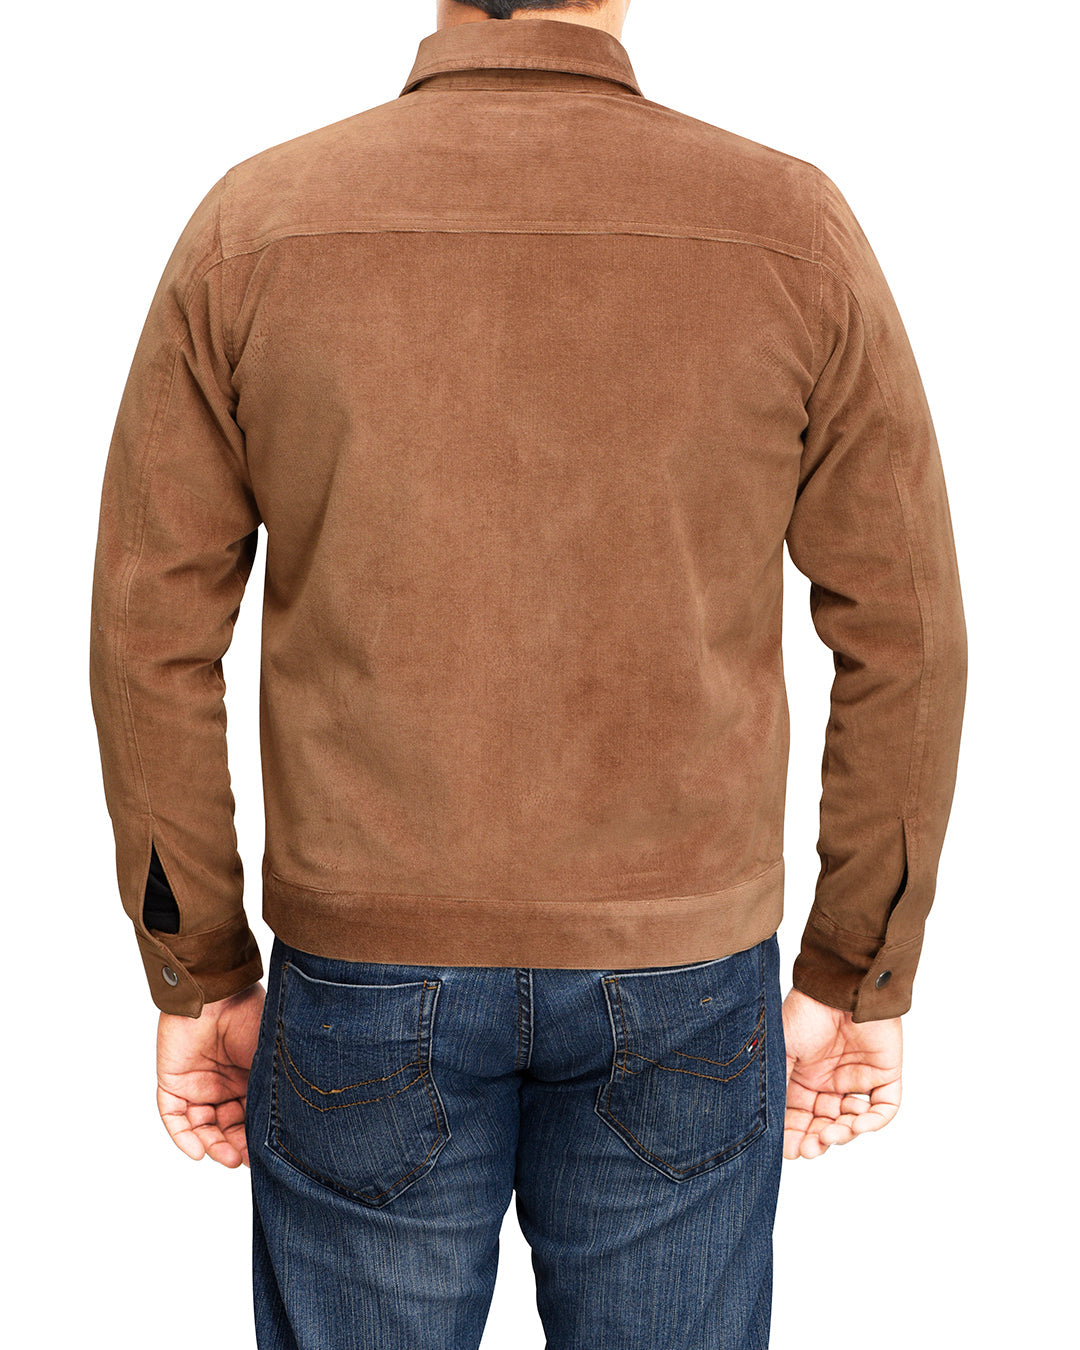 Back of model wearing the cord shirt jacket for men by Luxire in light brown